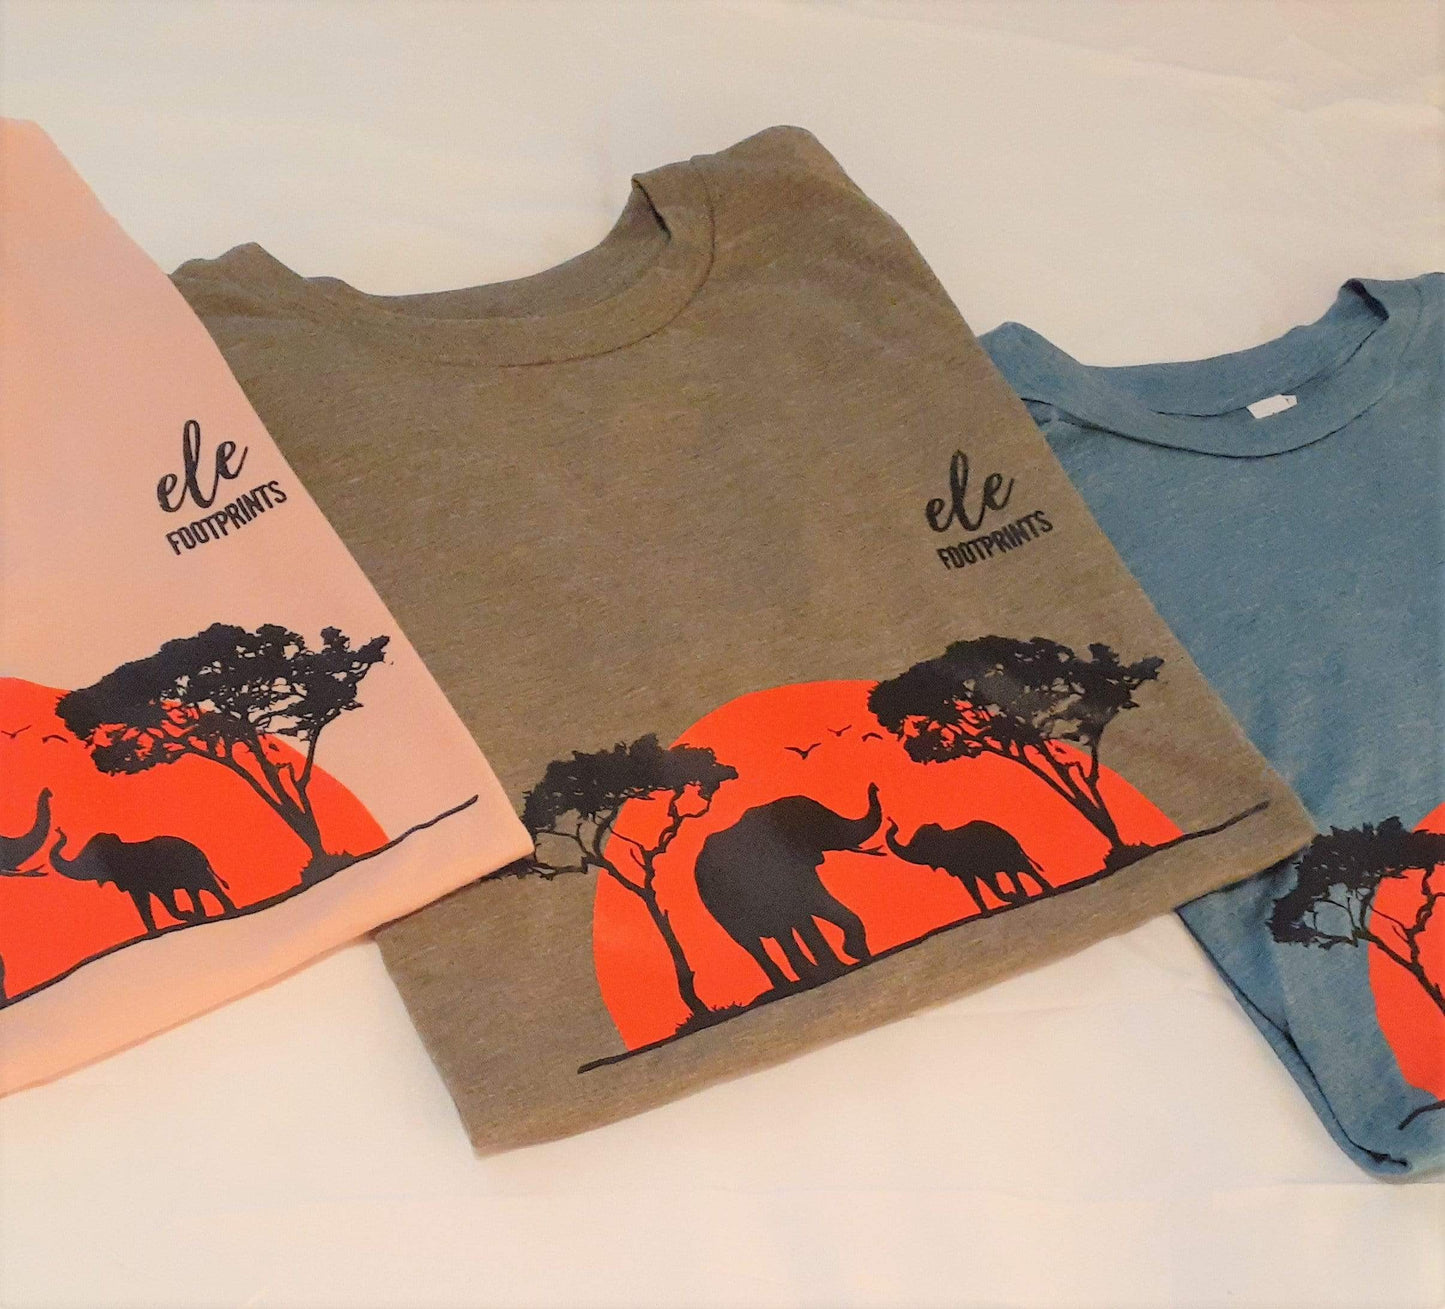 Women's Elephant Rolled Cuff T-Shirt - African Safari Sunset with Mama and Baby Elephants